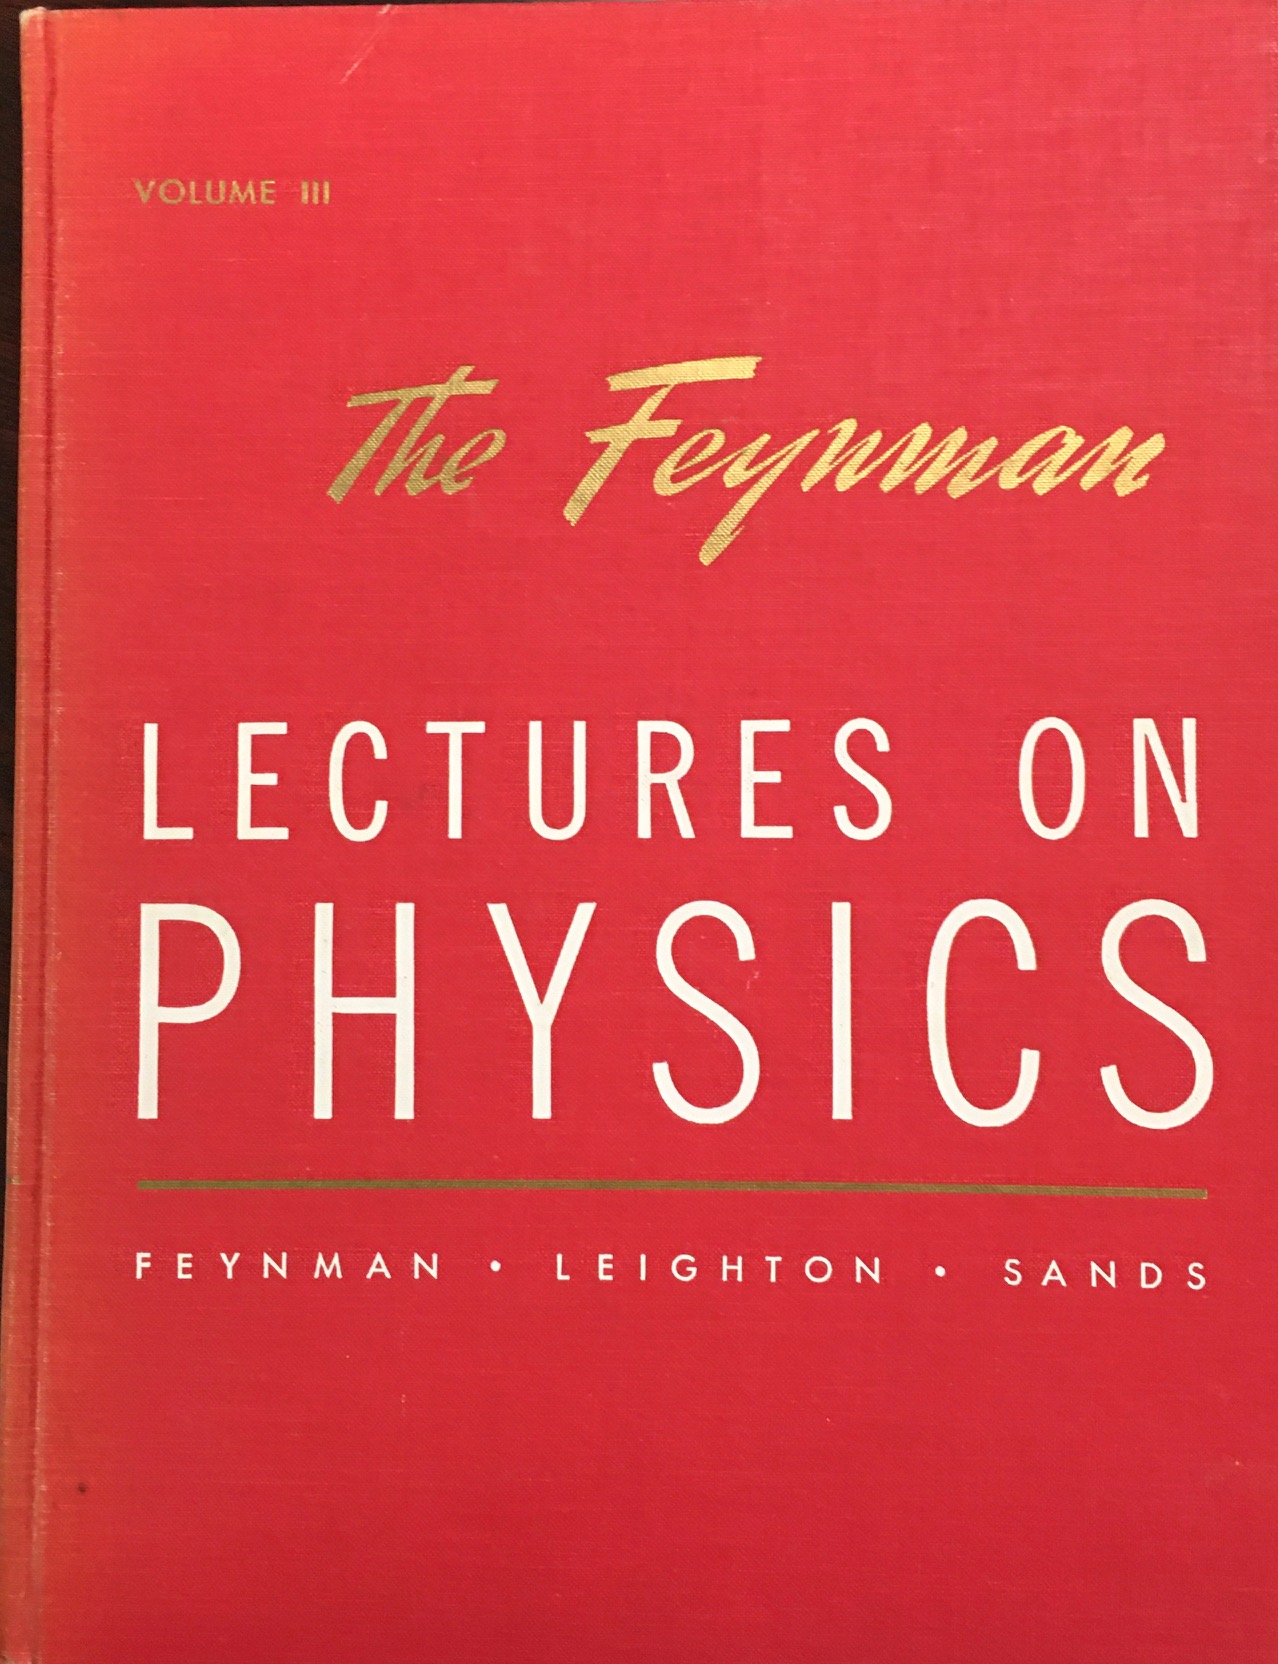 feynman's thesis a new approach to quantum theory pdf